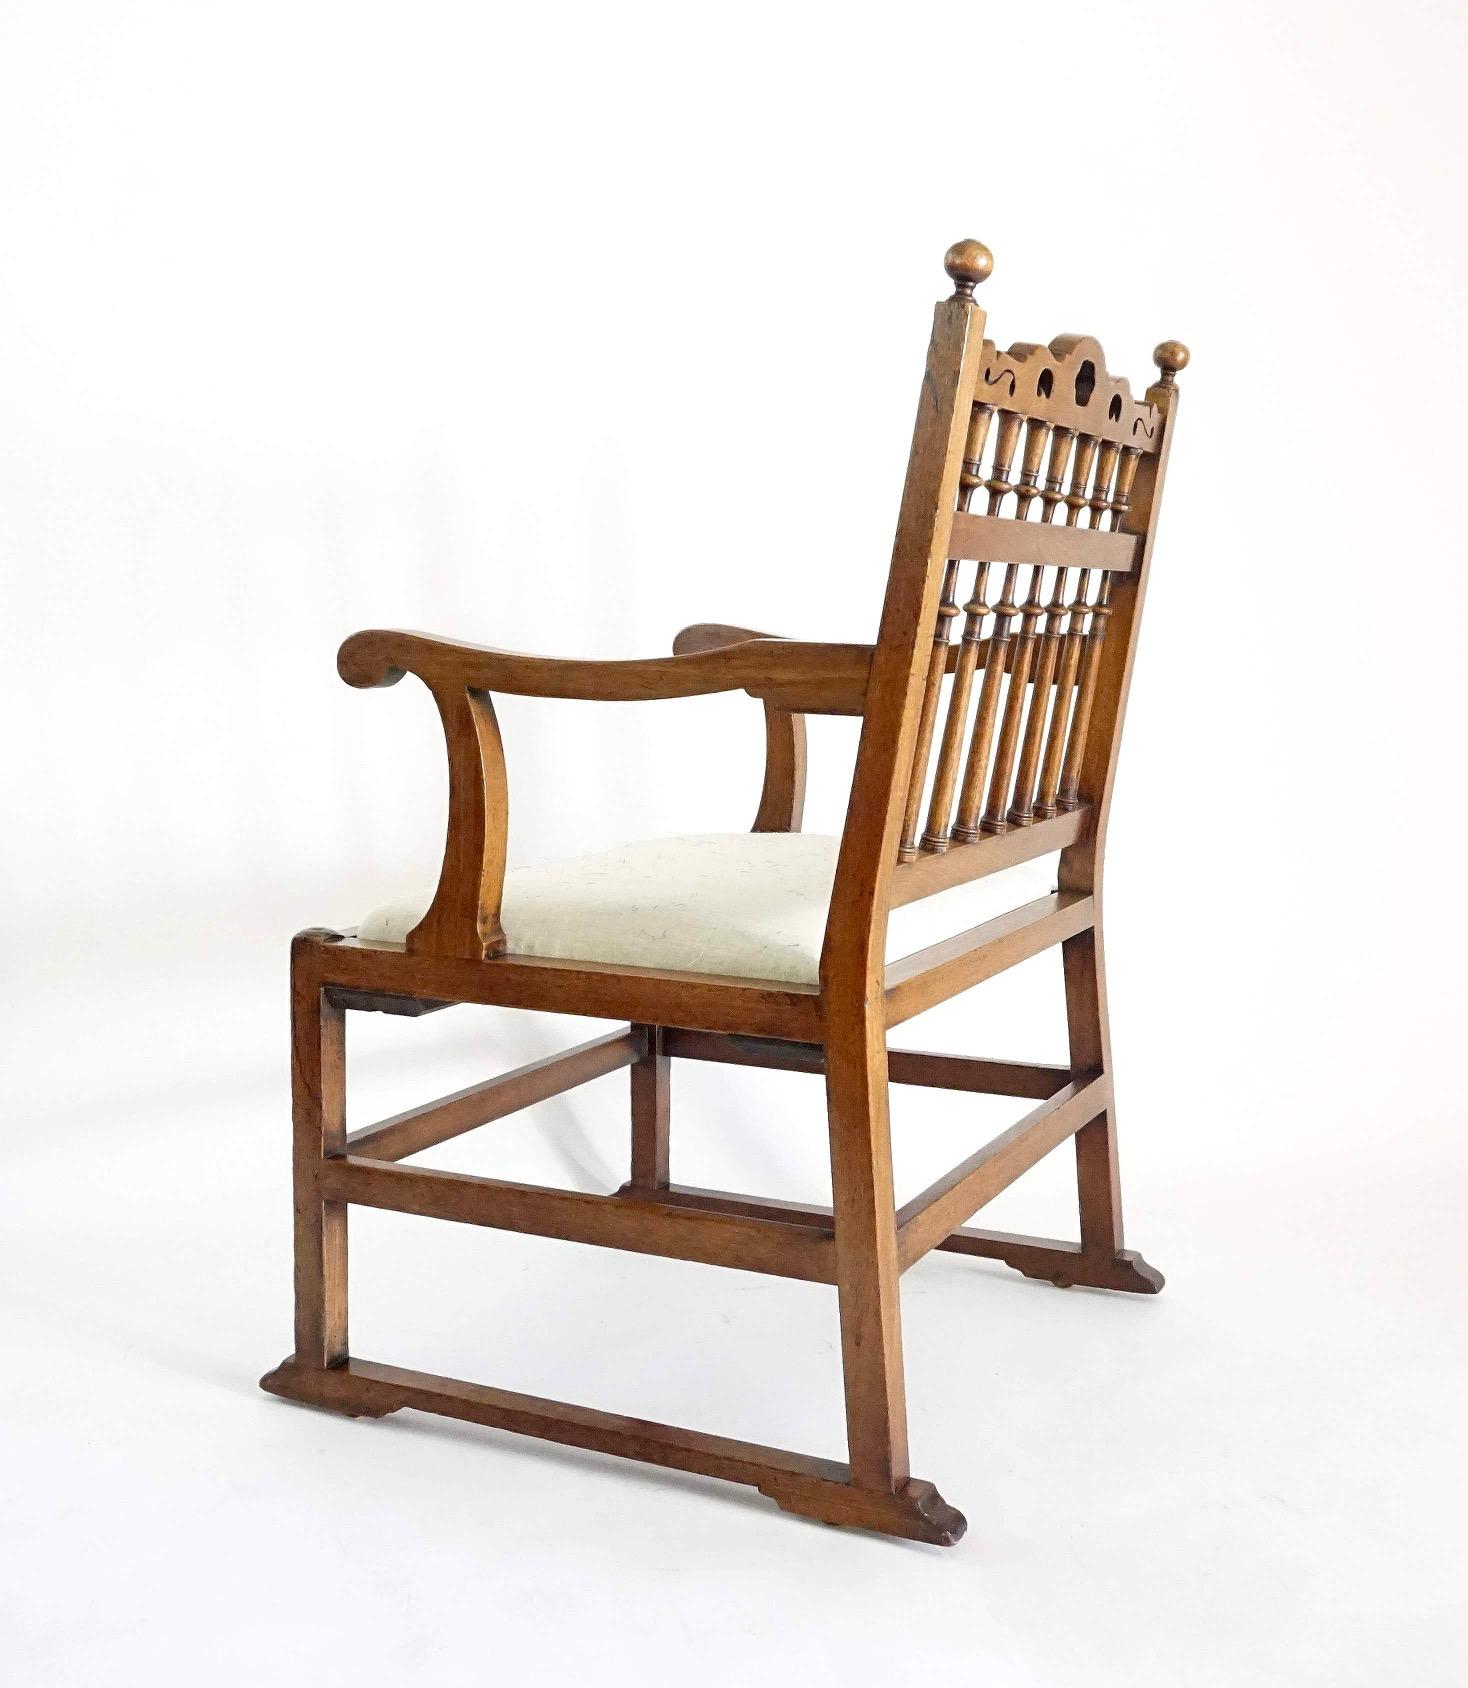 Sycamore A Pair of Northern English Spindle-Back Arm Chairs, circa 1780 For Sale